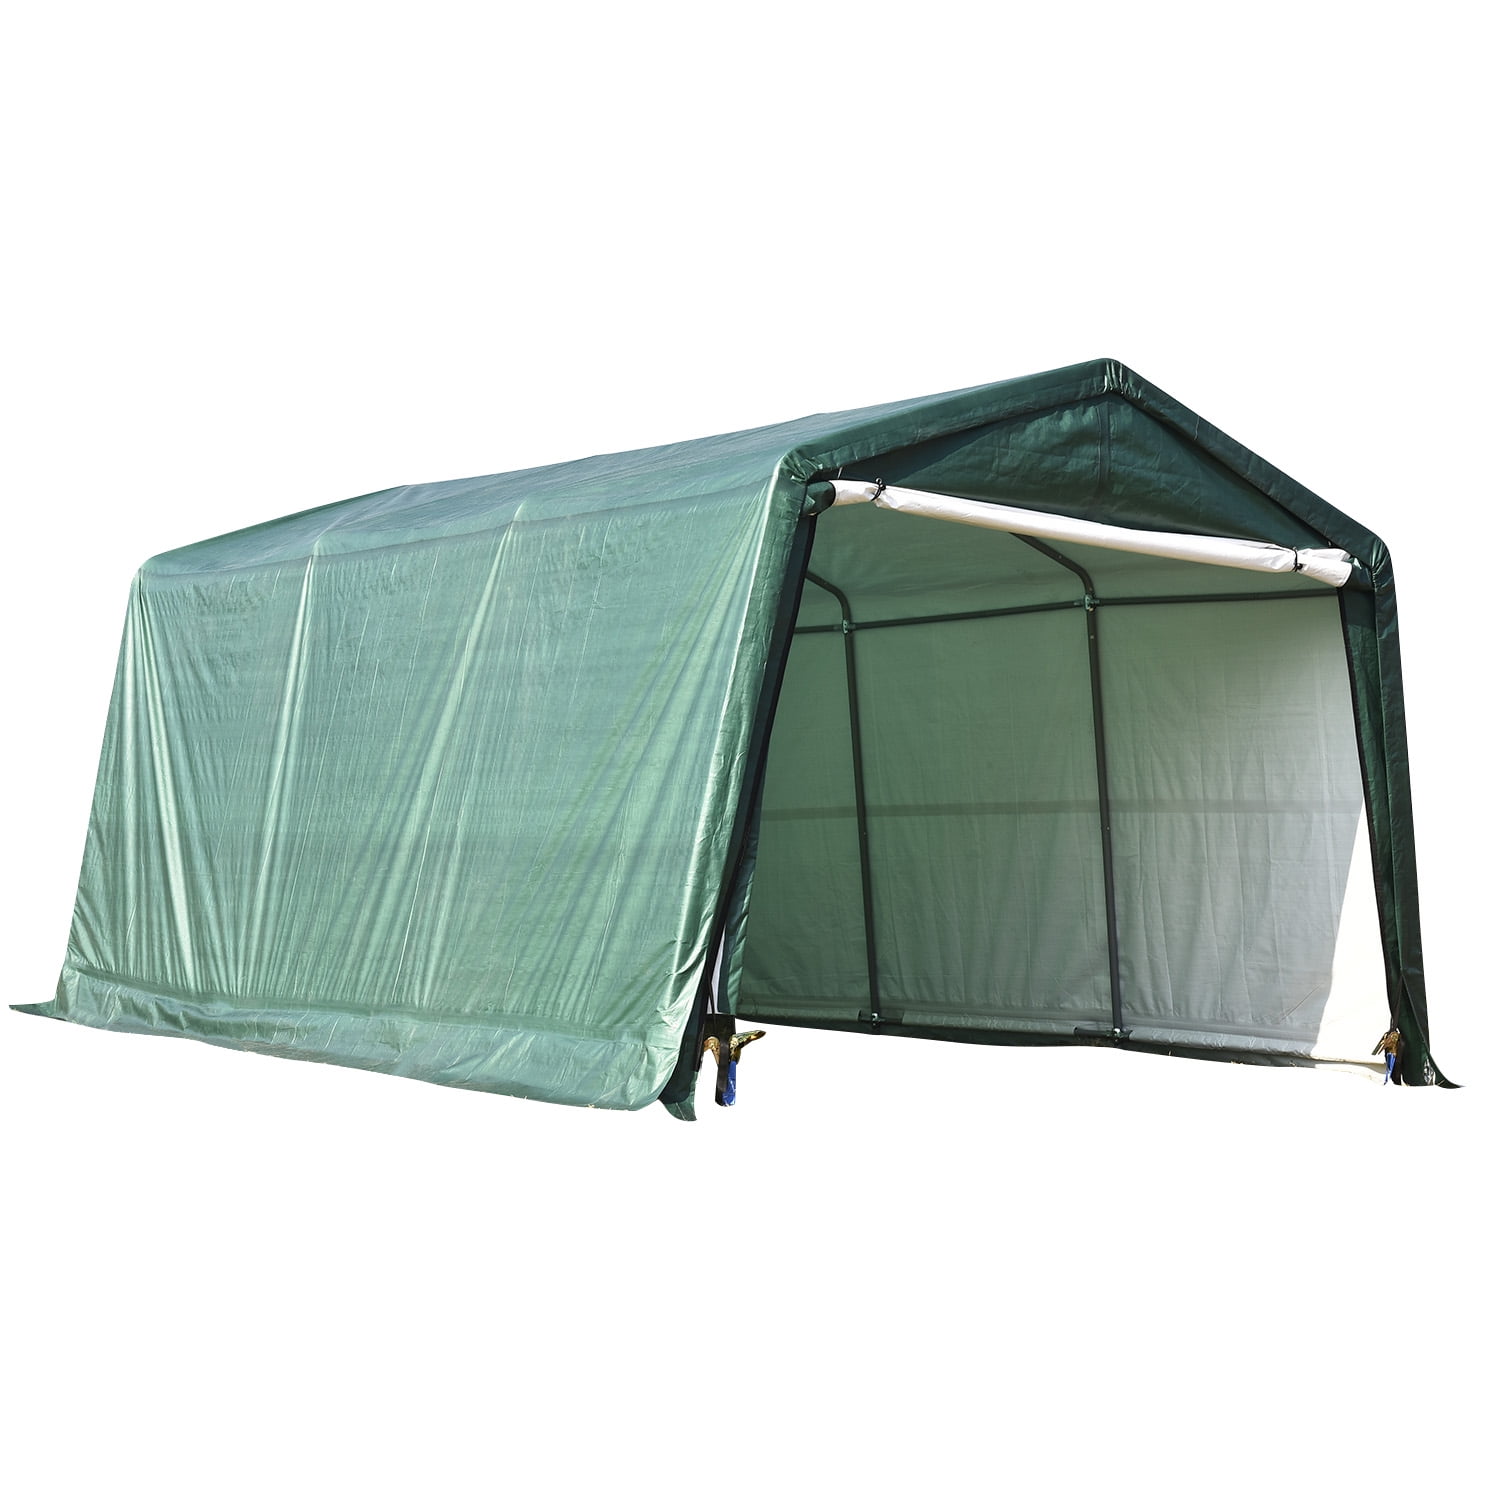 10x15 FT Canopy Carport Tent Car Shed ShelterLogic Outdoor Storage Sun Proof Top 